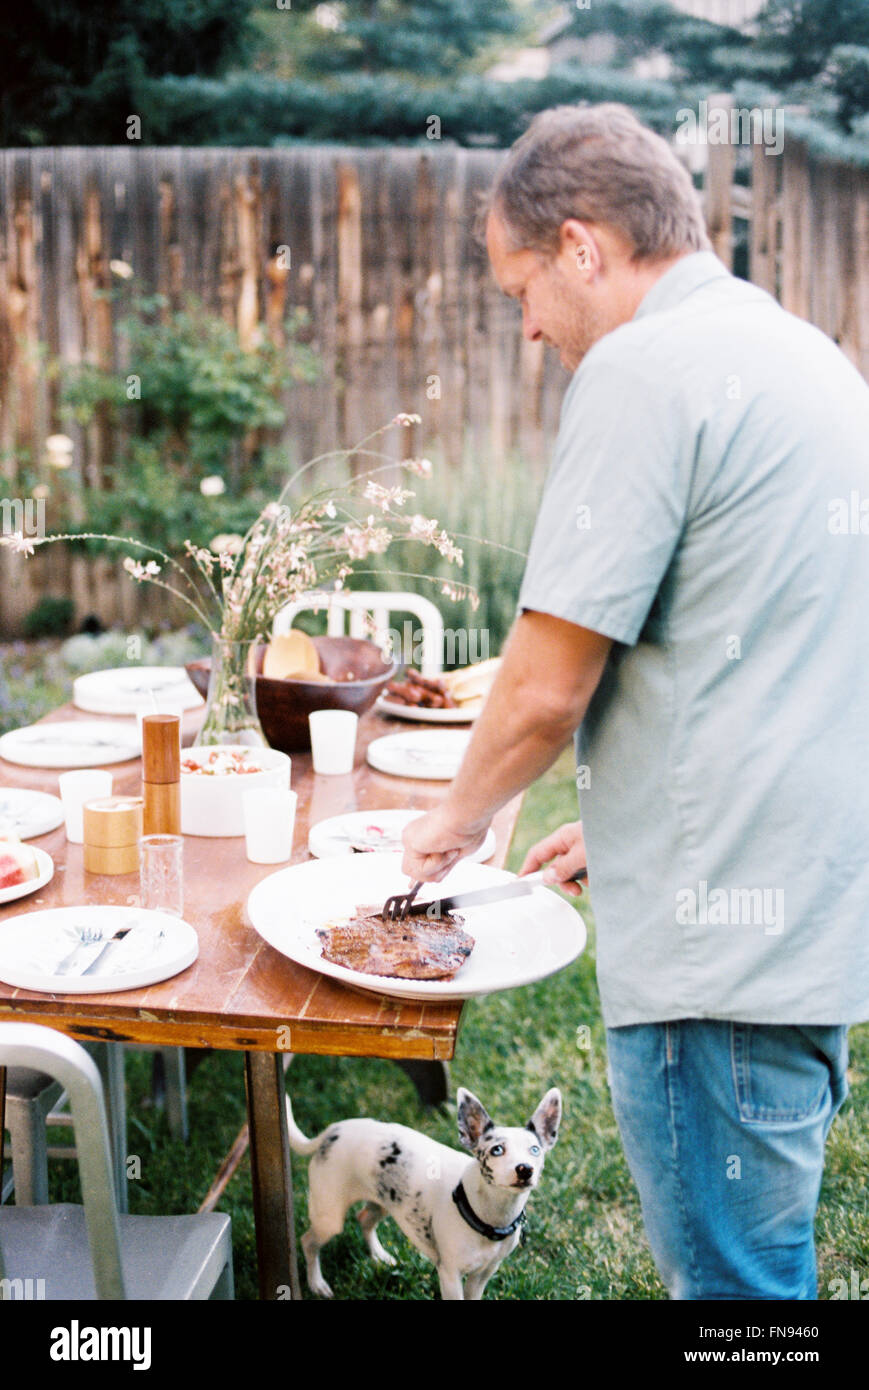 A man carving meat at a family meal in a garden, being watched by a small dog under the table. Stock Photo